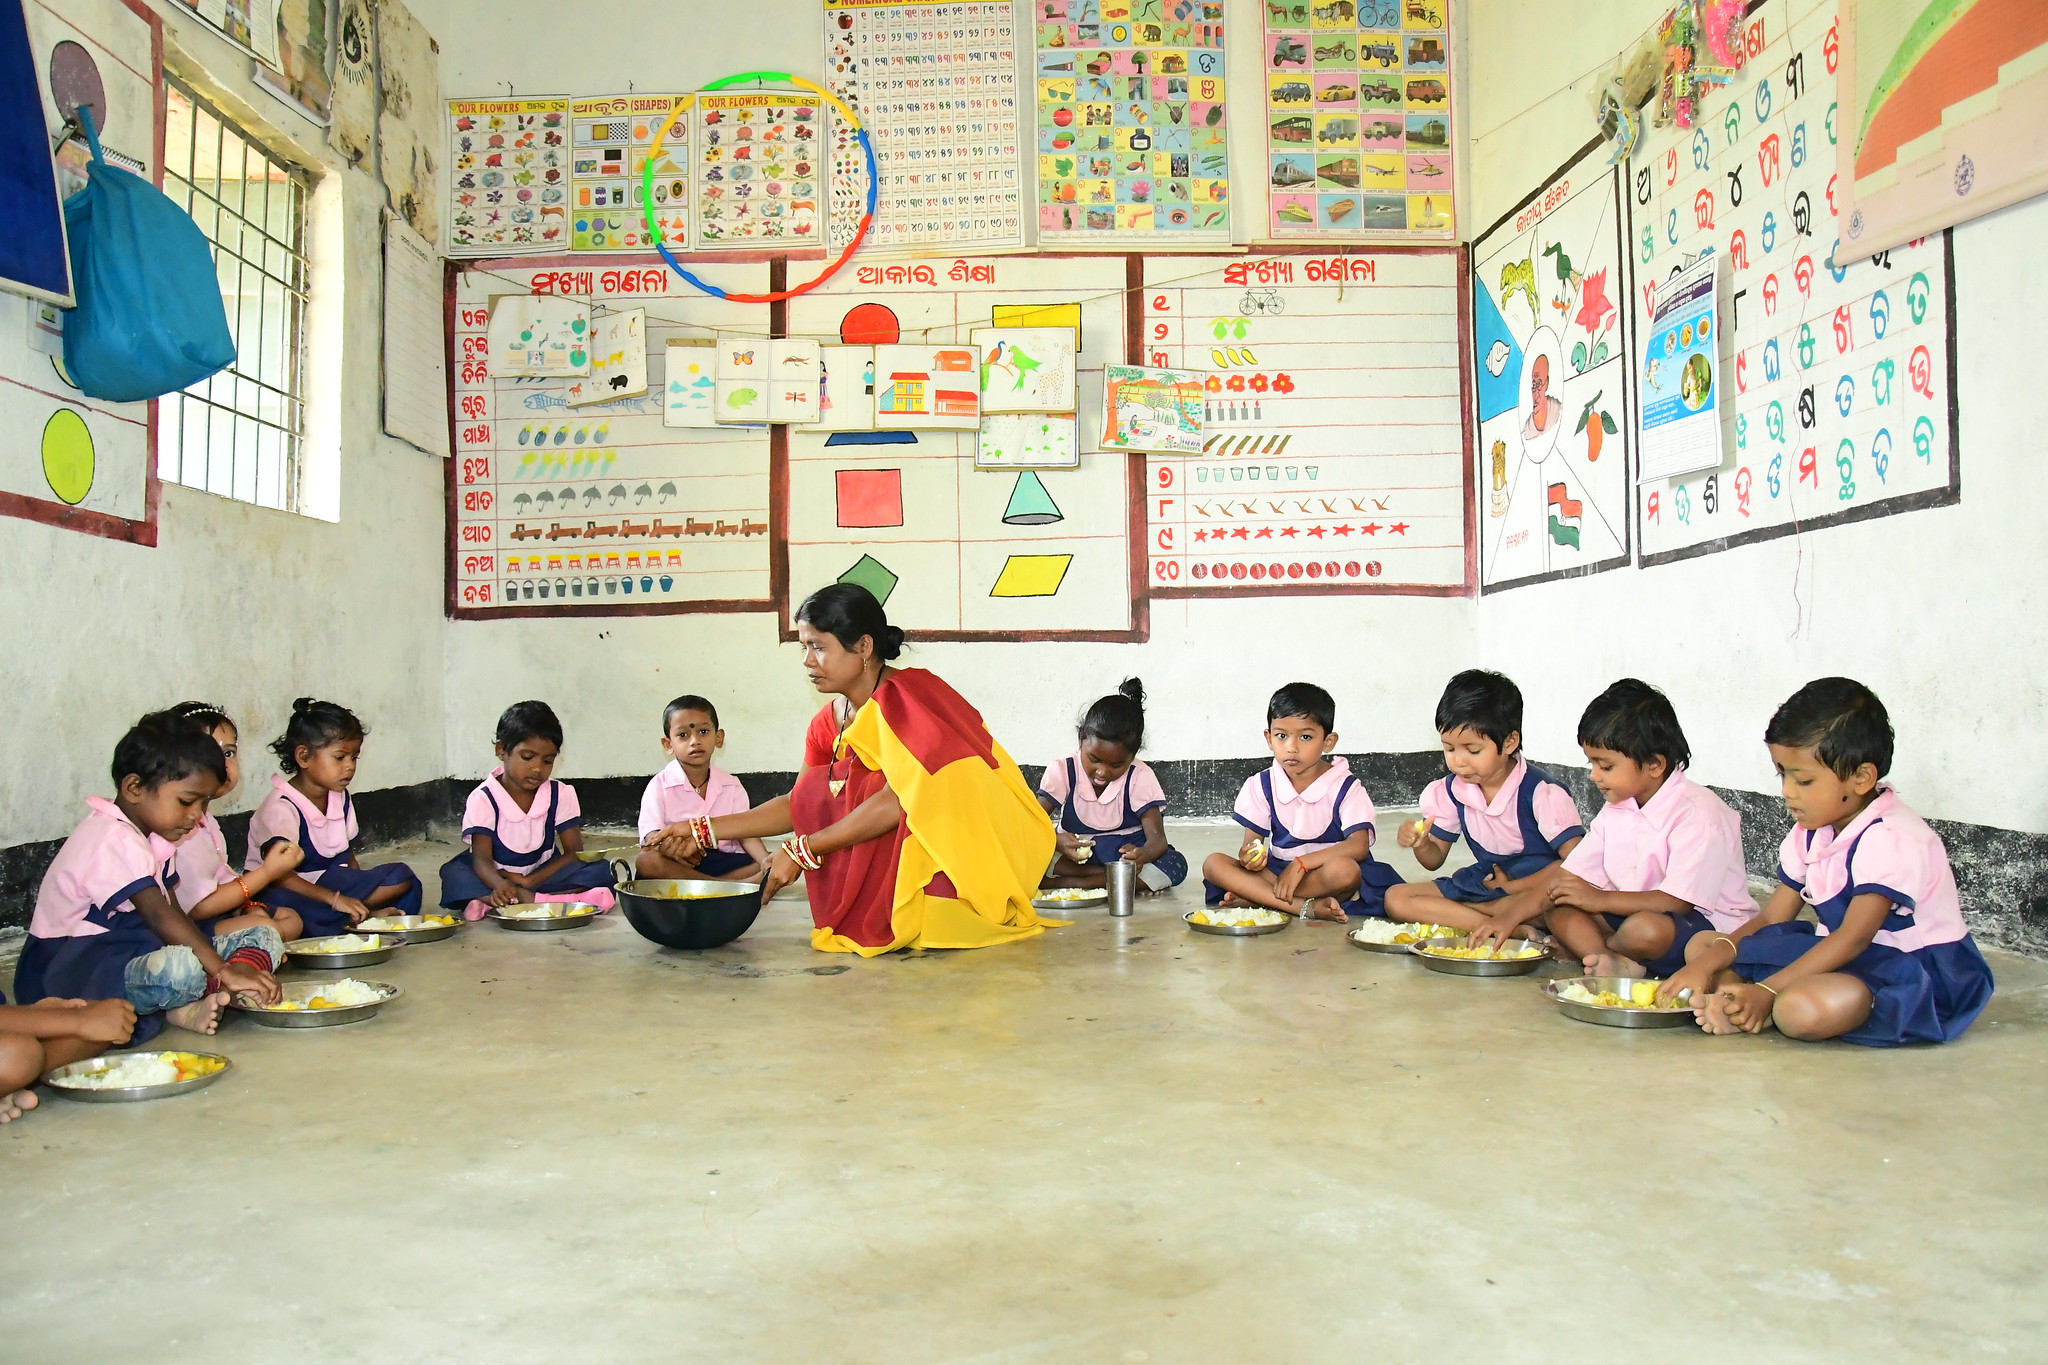 Children at the Bangabandha Anganwadi center (childcare center) enjoying small fish in hot cooked meals as part of the of Supplementary Nutrition Programme